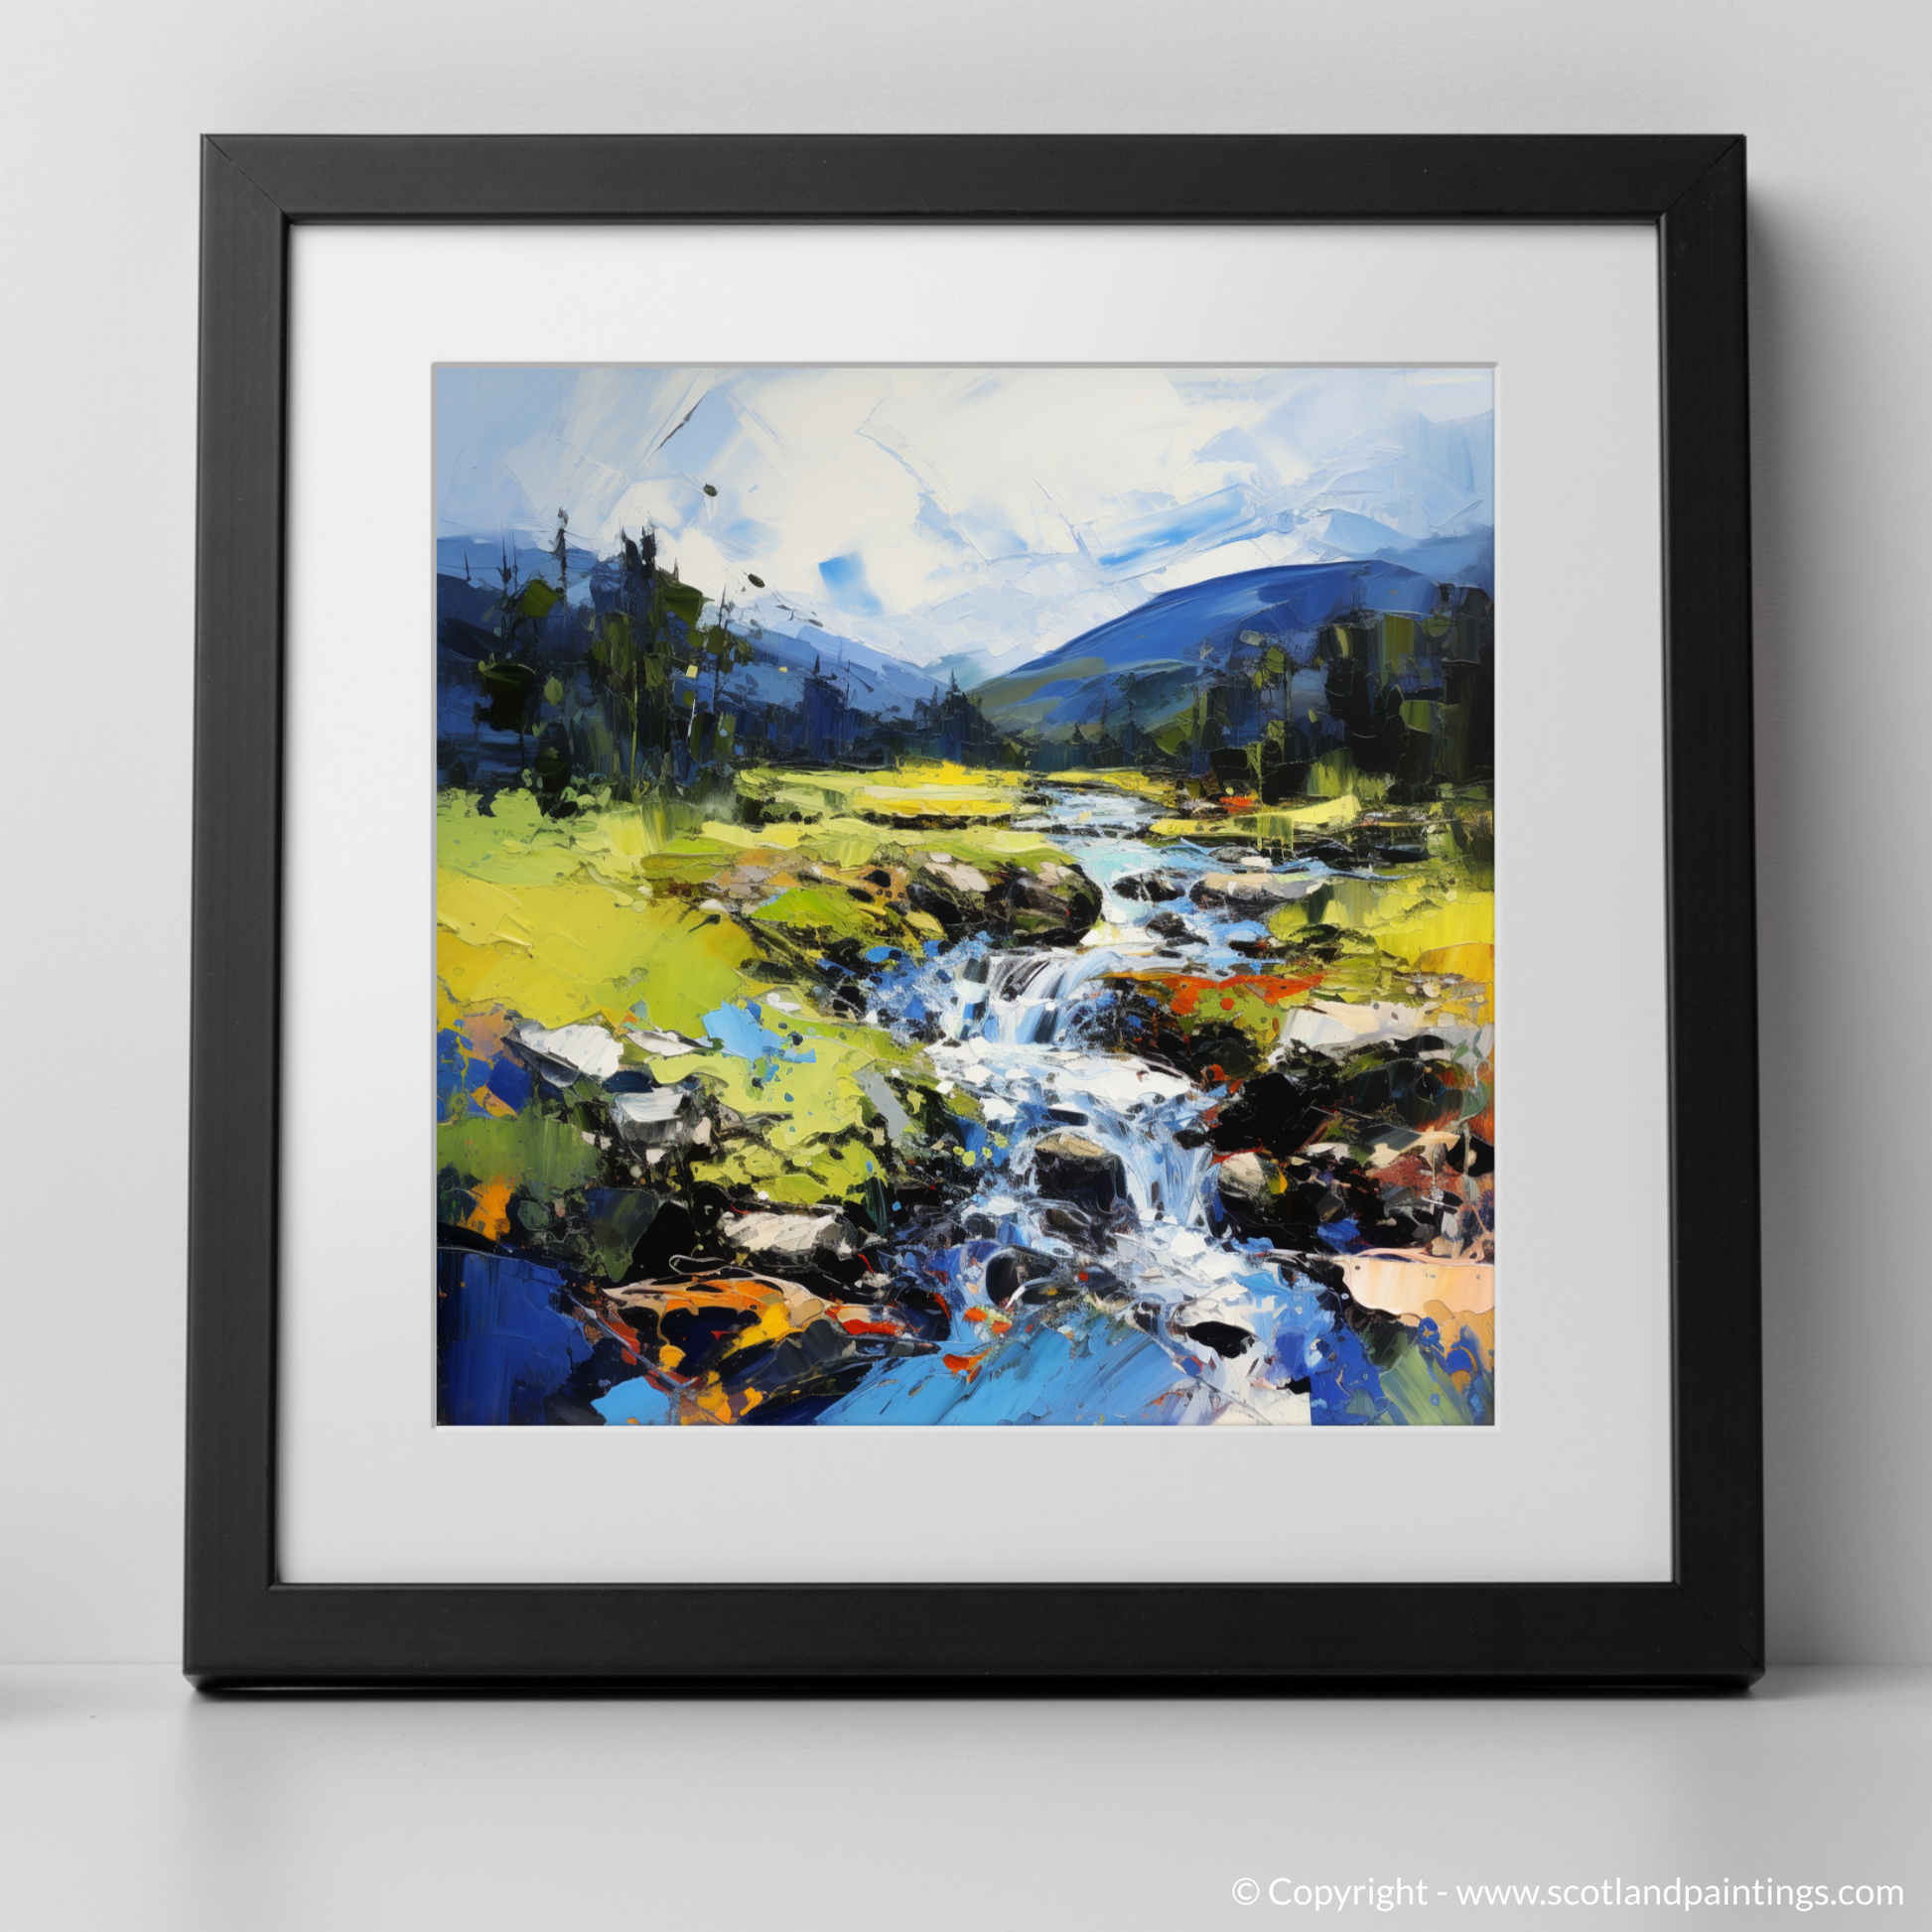 Art Print of Glen Esk, Angus in summer with a black frame